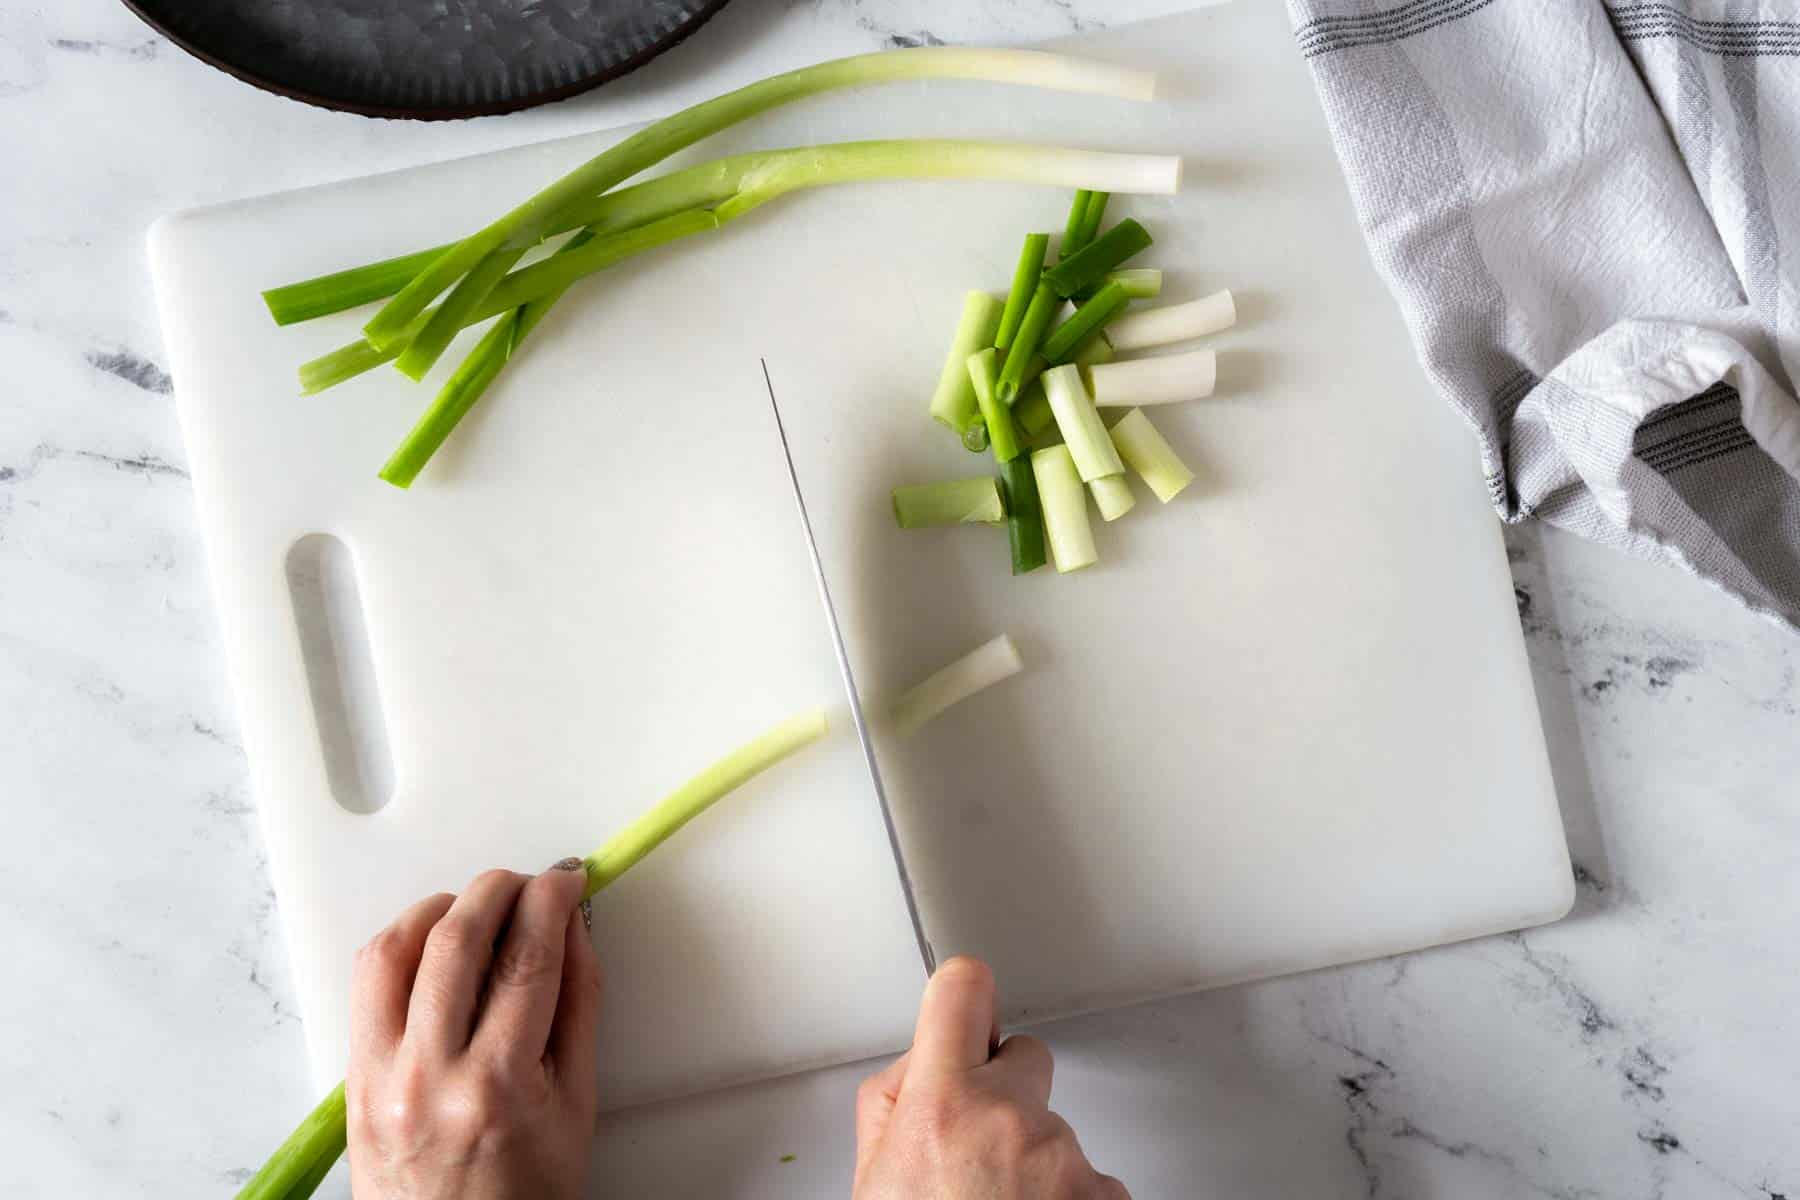 Person cutting green onions into chunks.